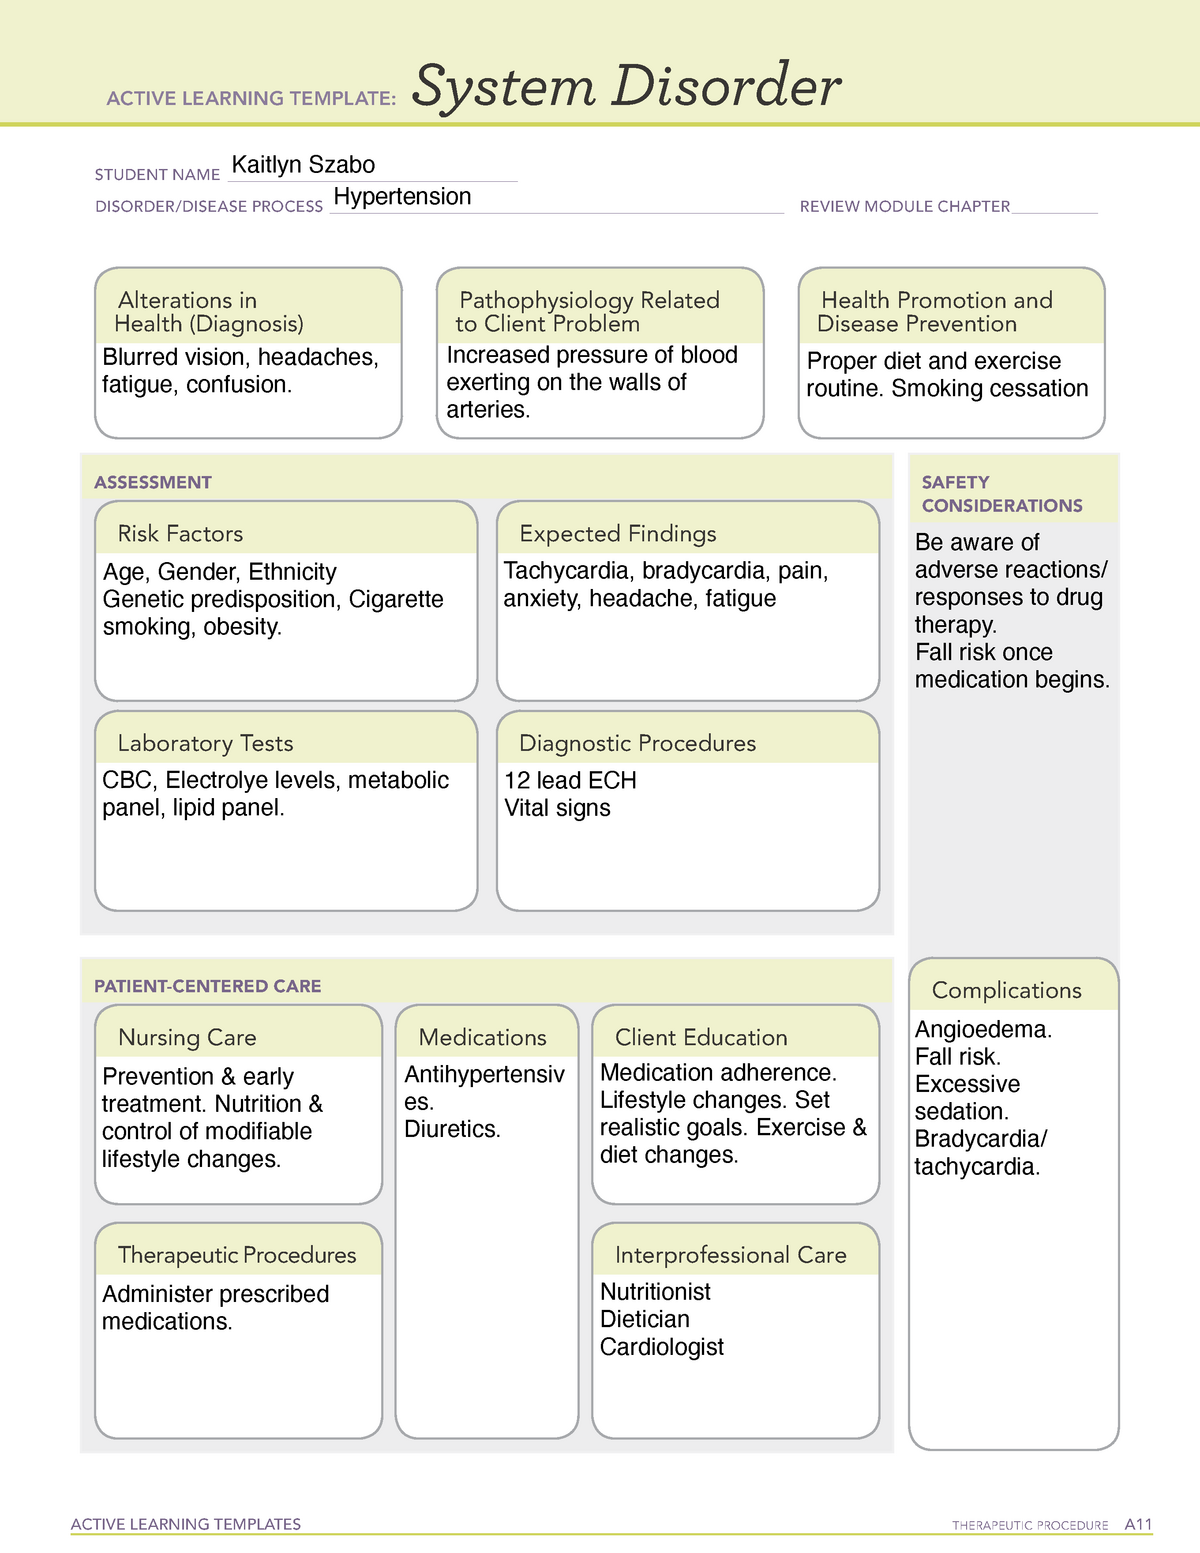 ATI ALT: Hypertension System disorder ACTIVE LEARNING TEMPLATES